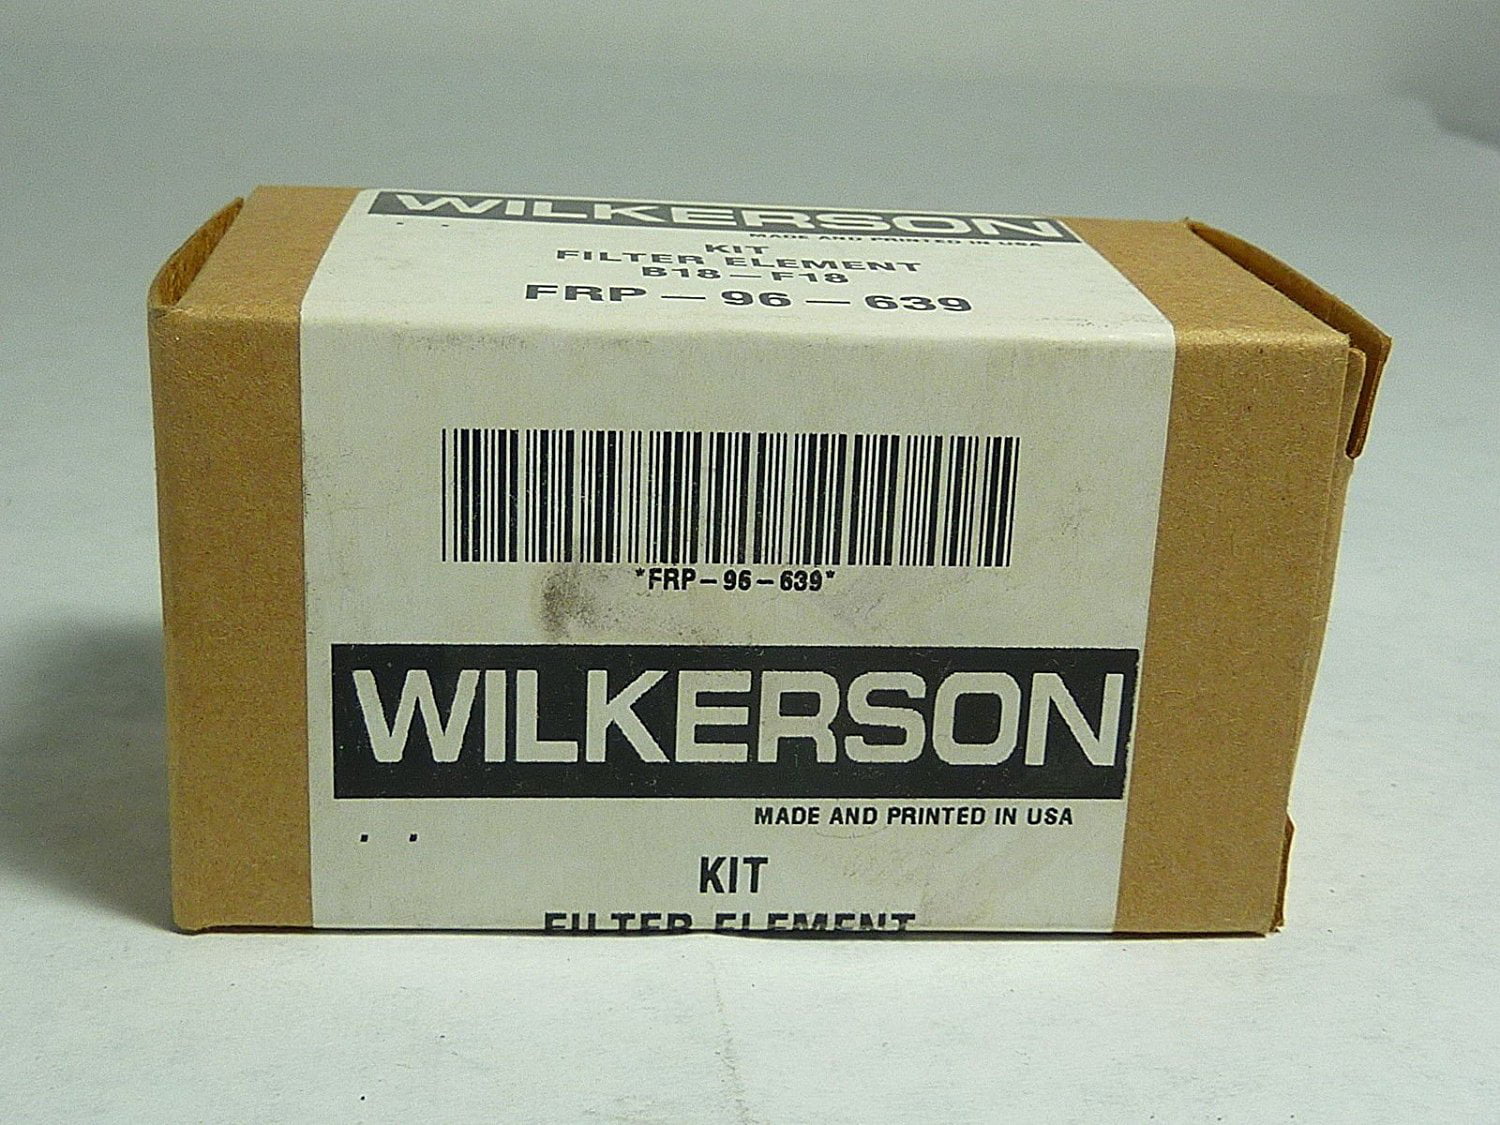 WILKERSON FRP-96-639 FILTER ELEMENT REPLACEMENT KIT NEW 